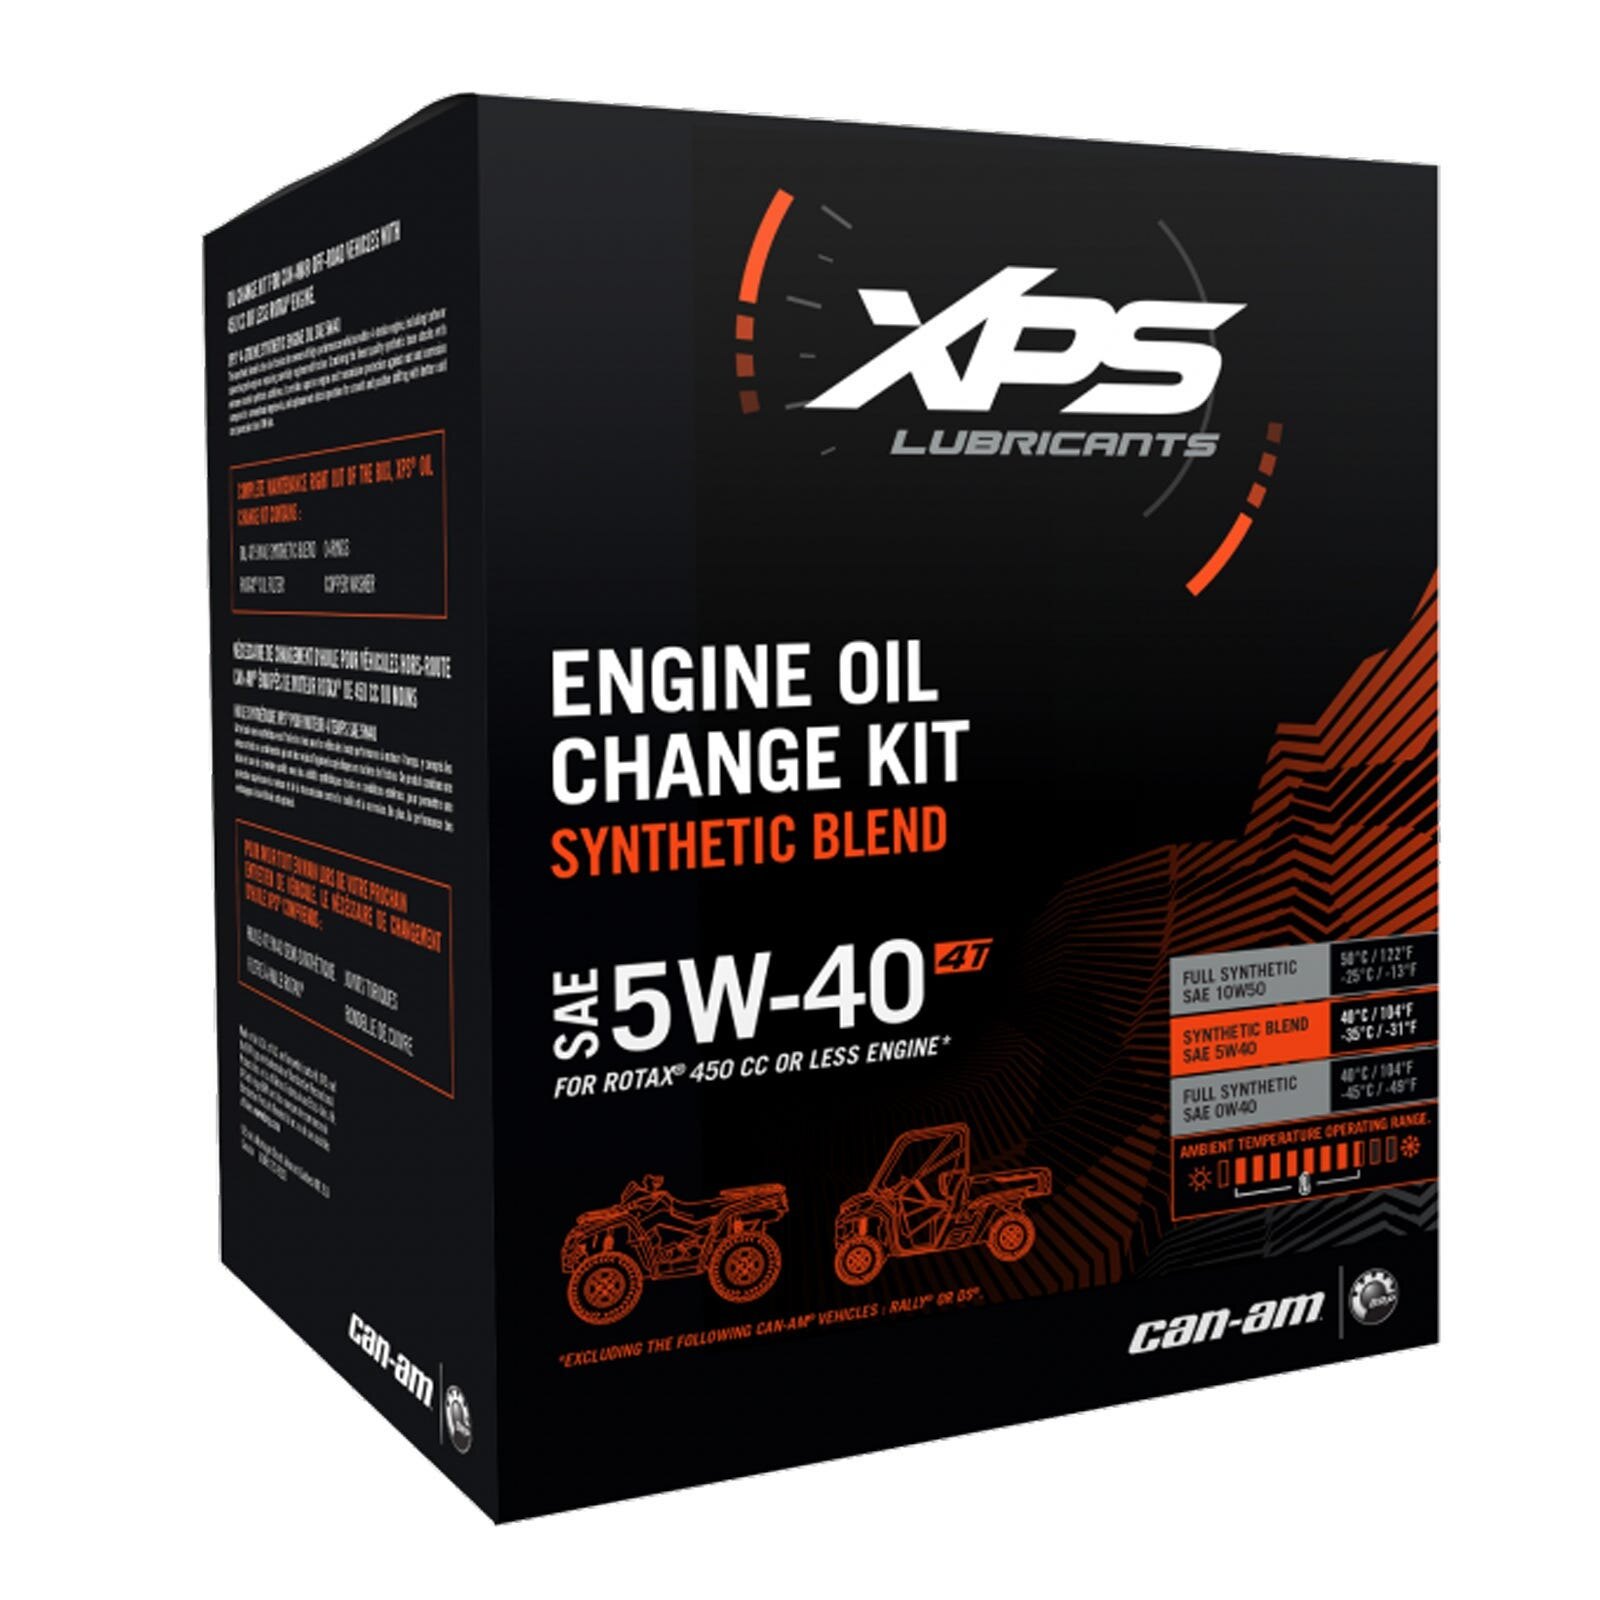 4T 5W 40 Synthetic Blend Oil Change Kit for Rotax 450 cc or less engine